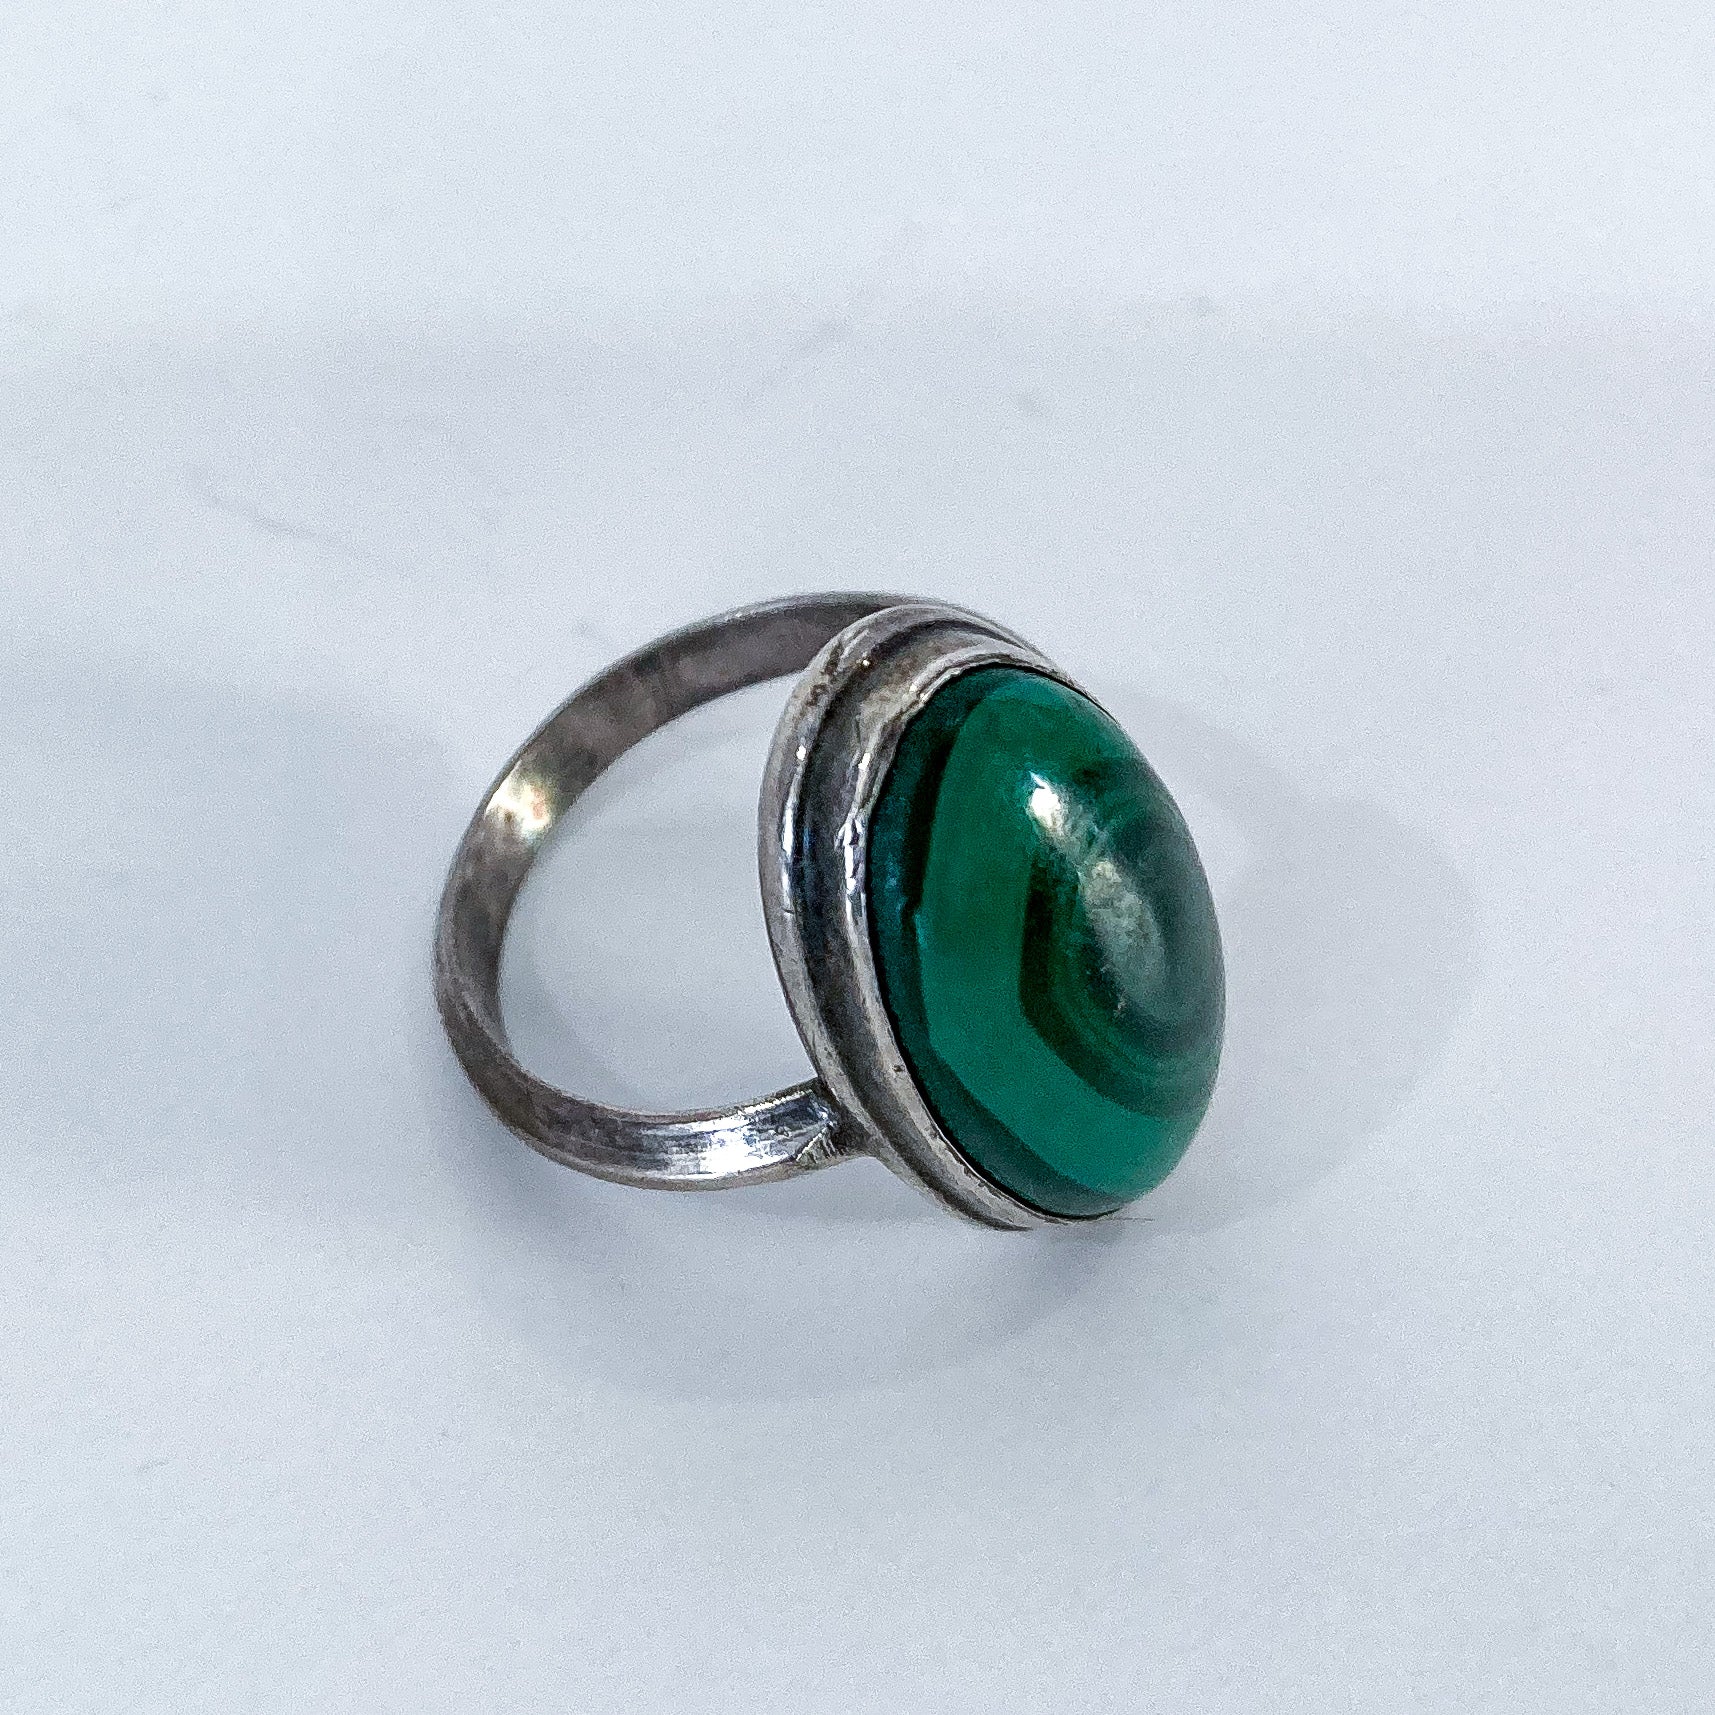 Vintage Domed Oval Swirling Rich Green Malachite Sterling Silver Ring Slightly Above